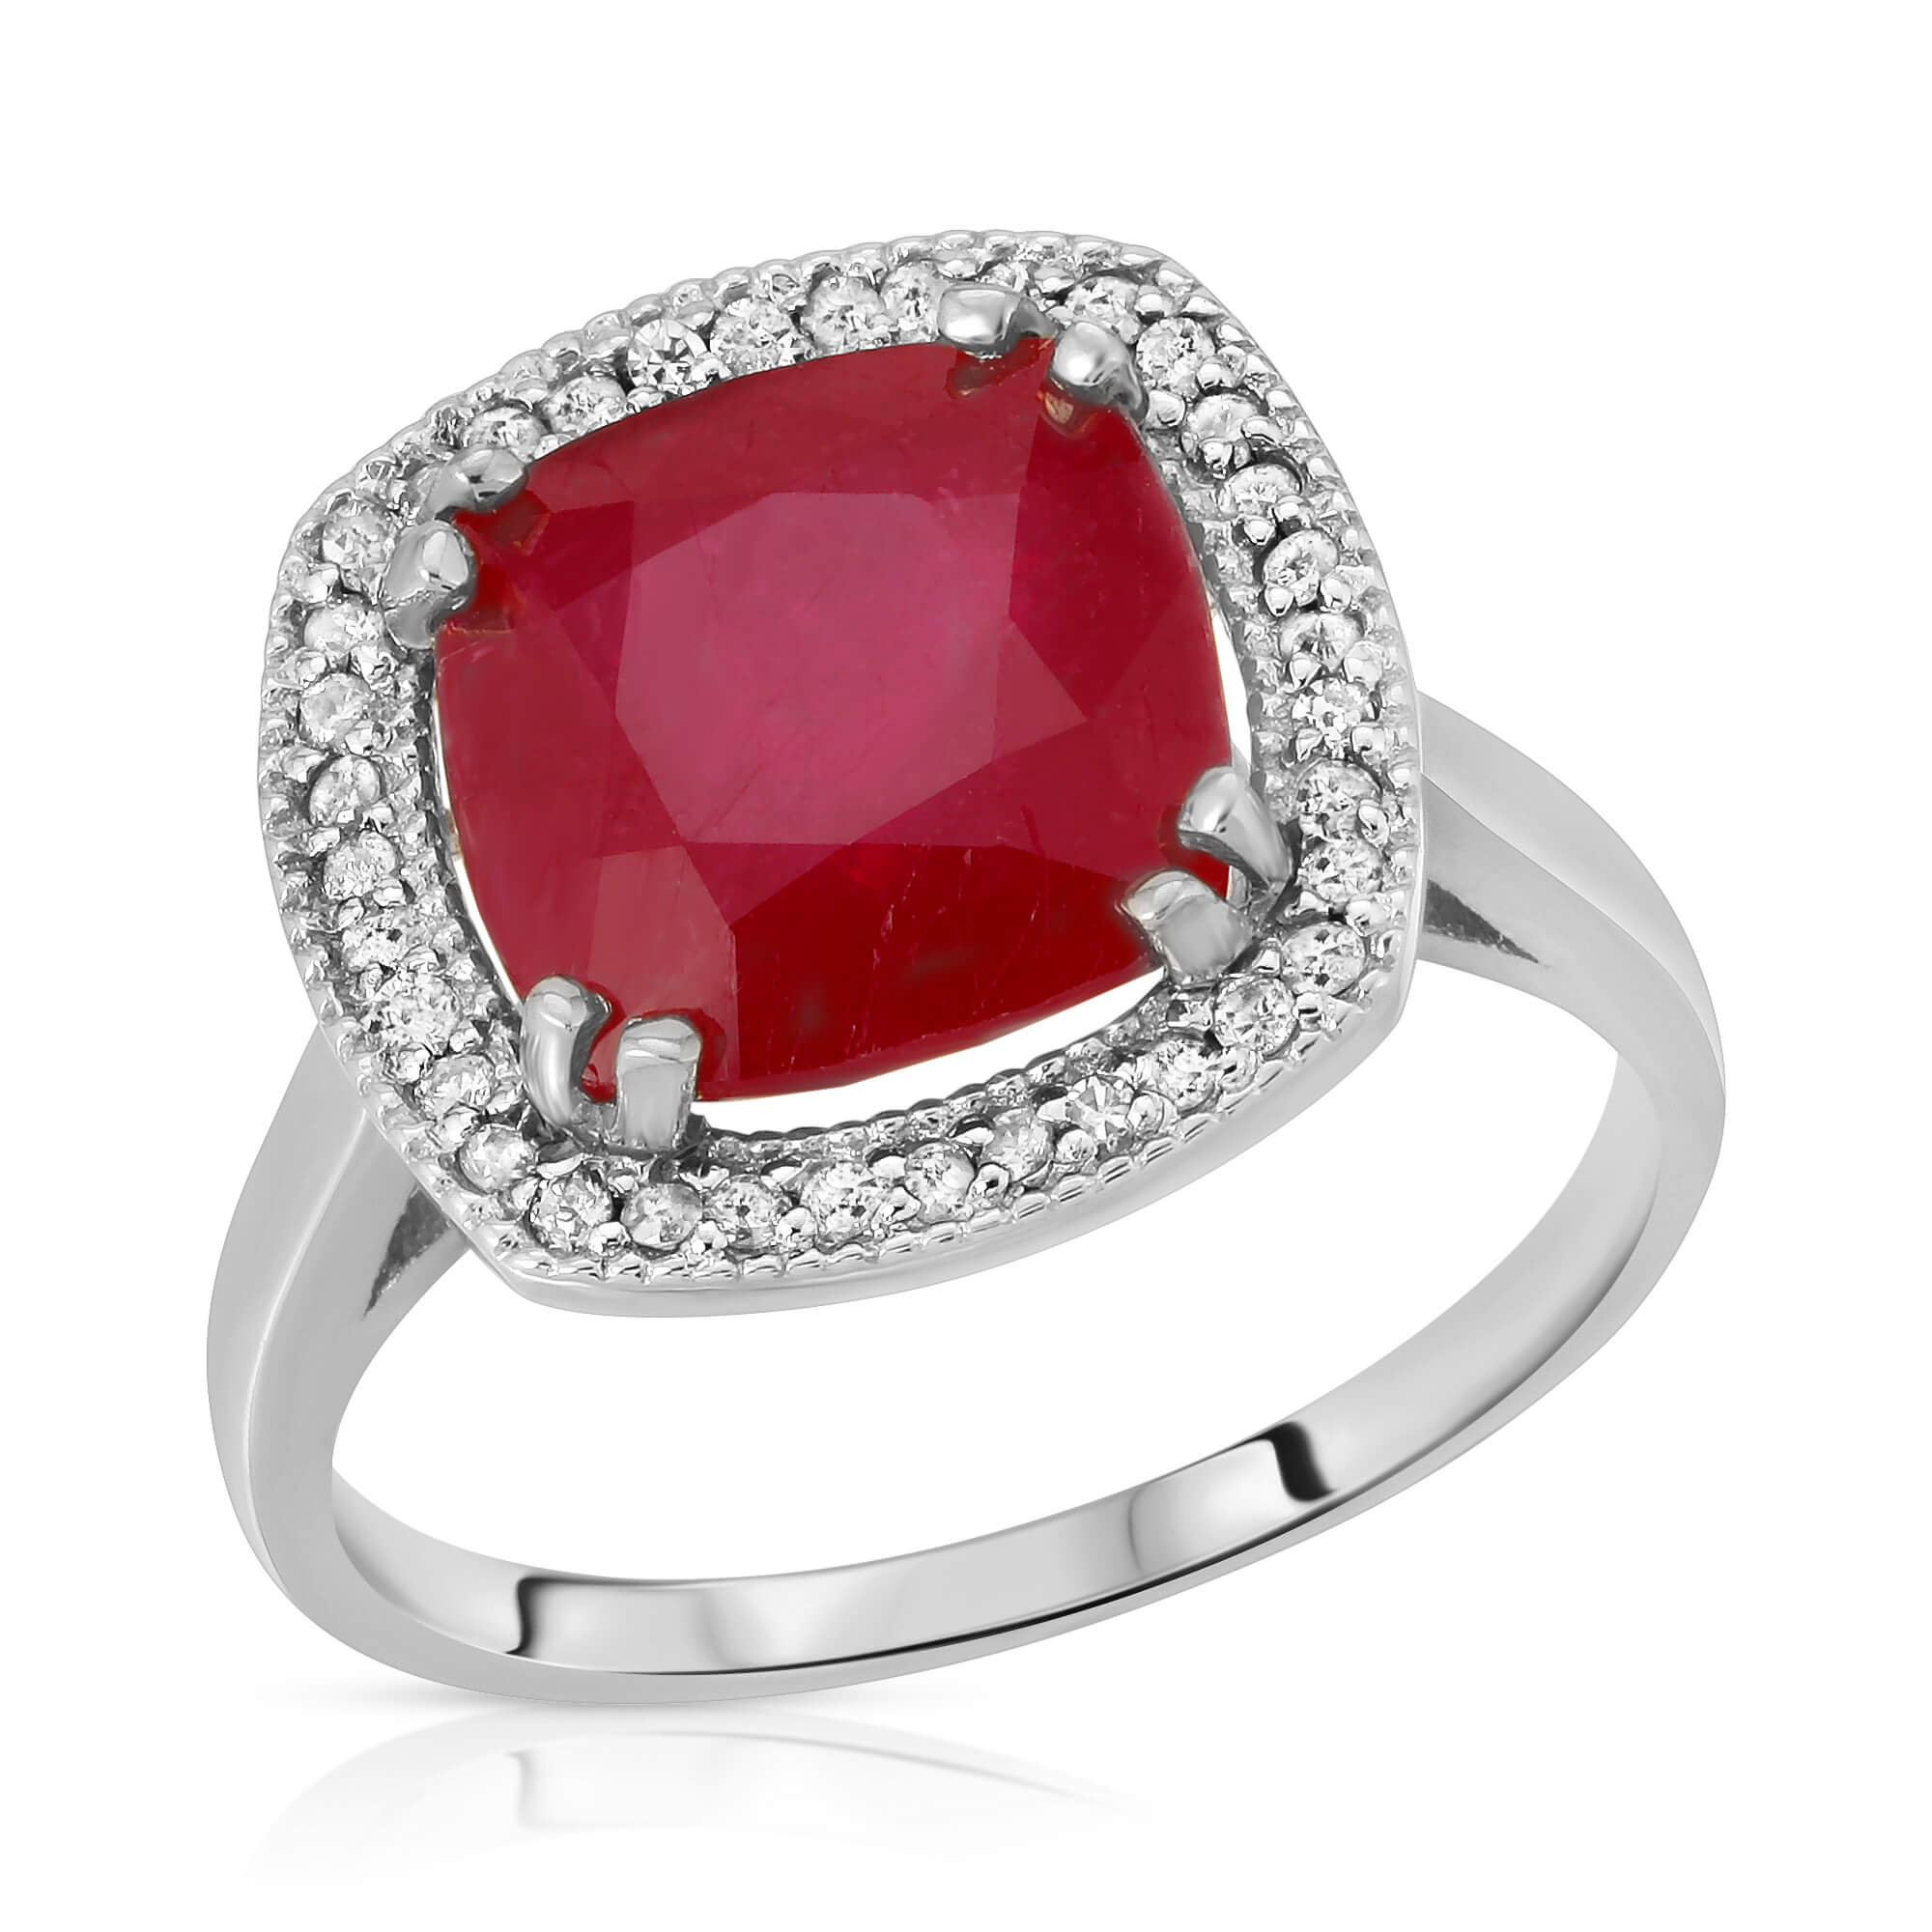 Cushion Cut Ruby Ring 6.9 ctw in 9ct White Gold